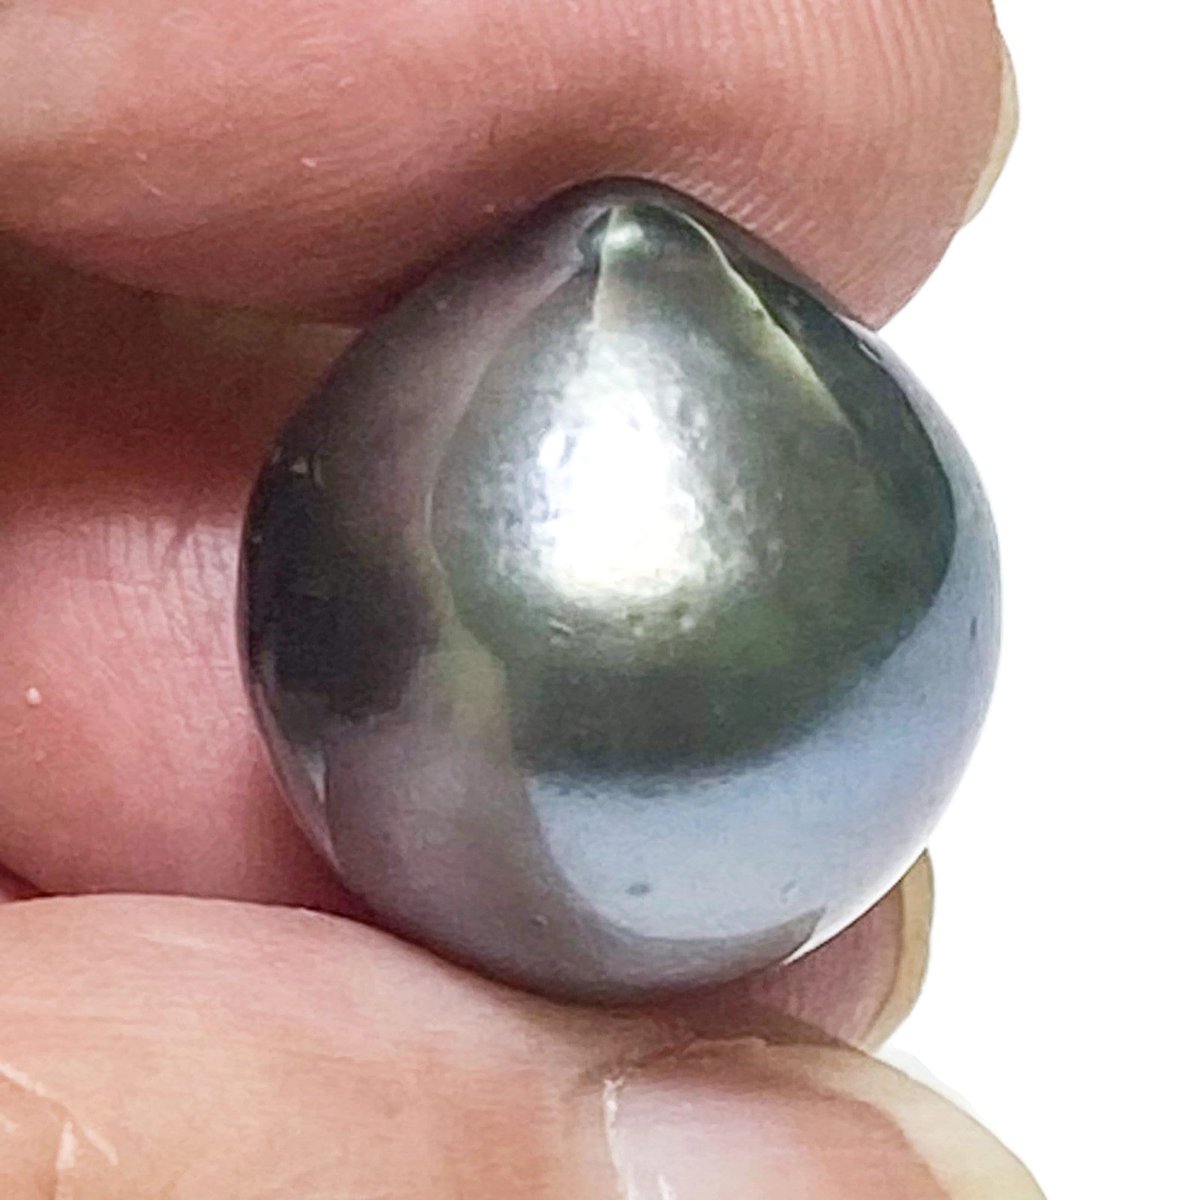 Excited to share the latest addition to my #etsy shop: Best Mother's Day Gift! Giant Teardrop 4.58 g rams14.6x15.8mm Peacock Grey Green Tahitian South Sea Cultured Pearl Loose - Undrille https://t.co/3P8s3ZAgNQ #no #green #undrilled #pearlshell #gray #lovefriendship #j https://t.co/DmvMwzUOvJ